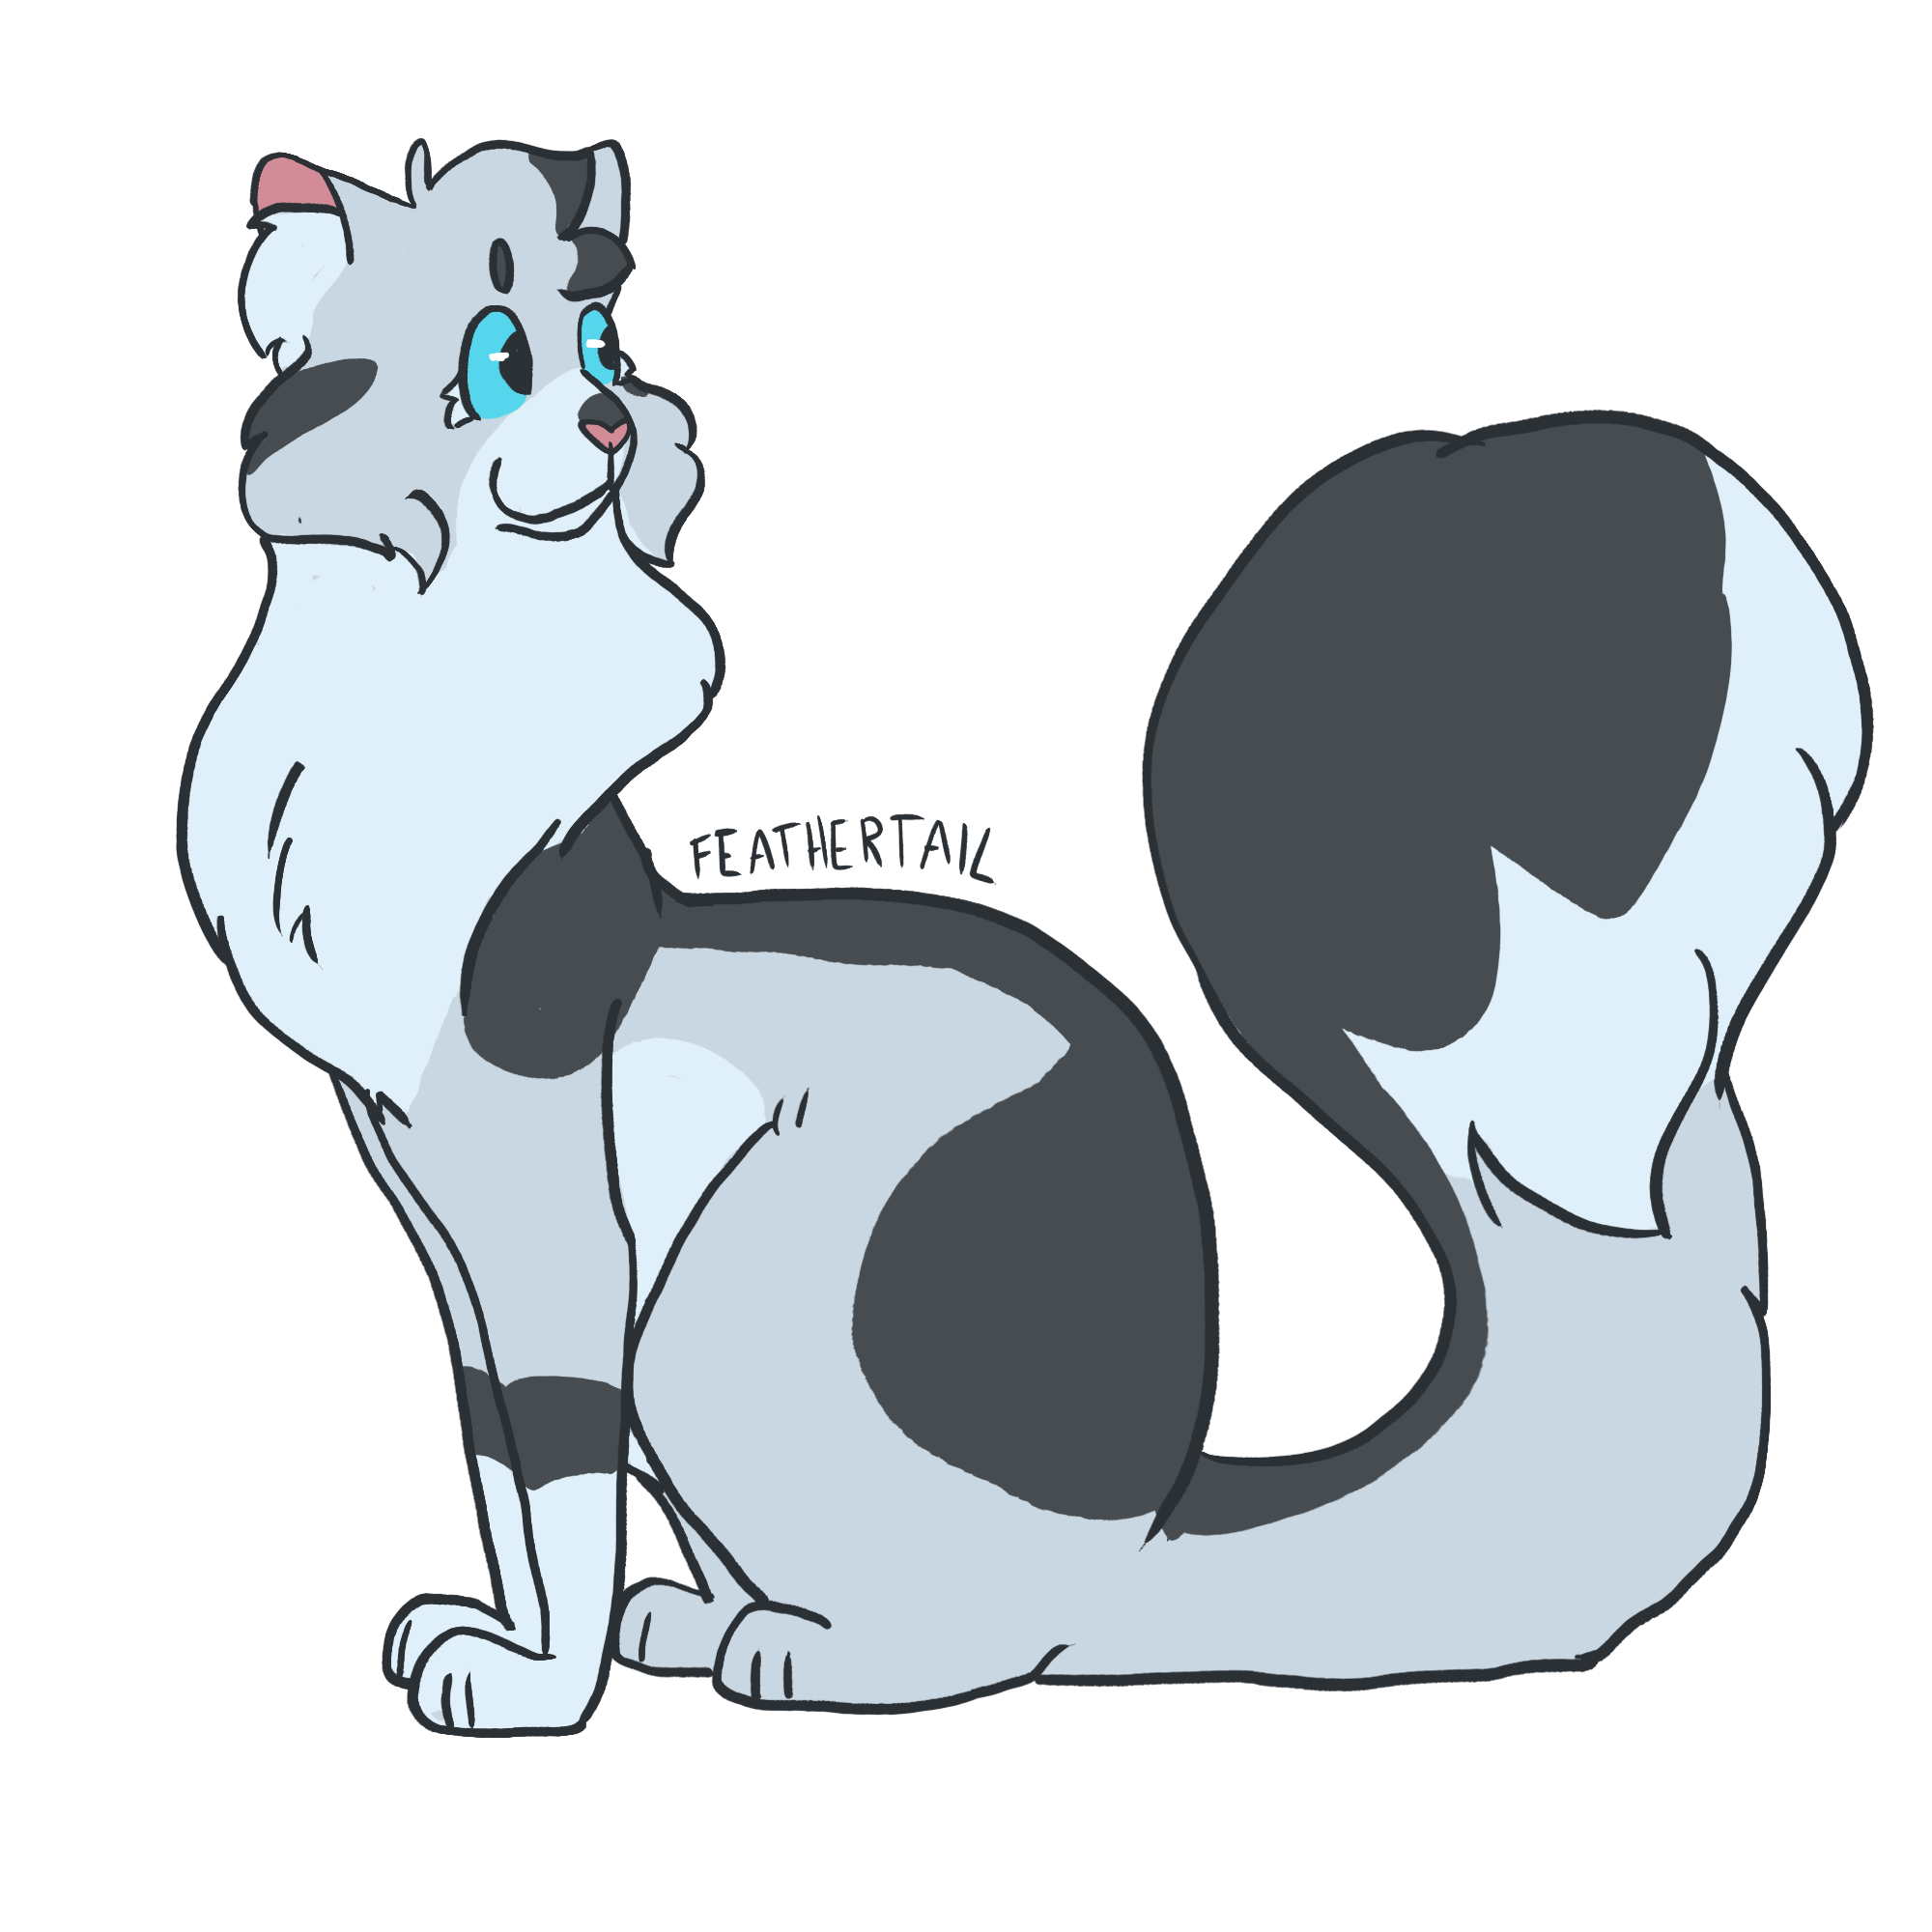 [a design of Feathertail sitting]